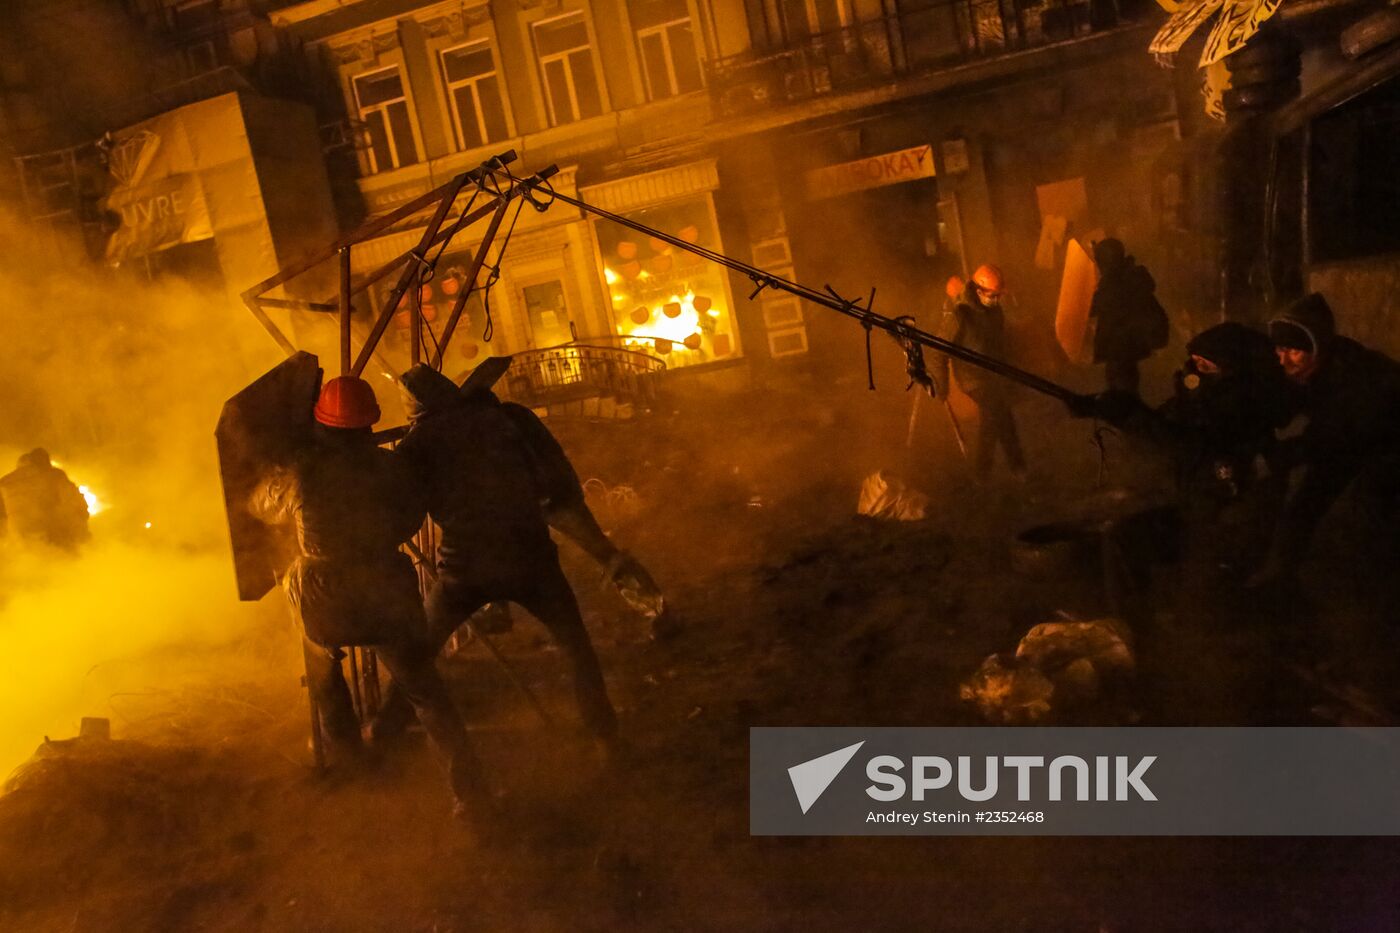 Protesters clash with police in center of Kiev